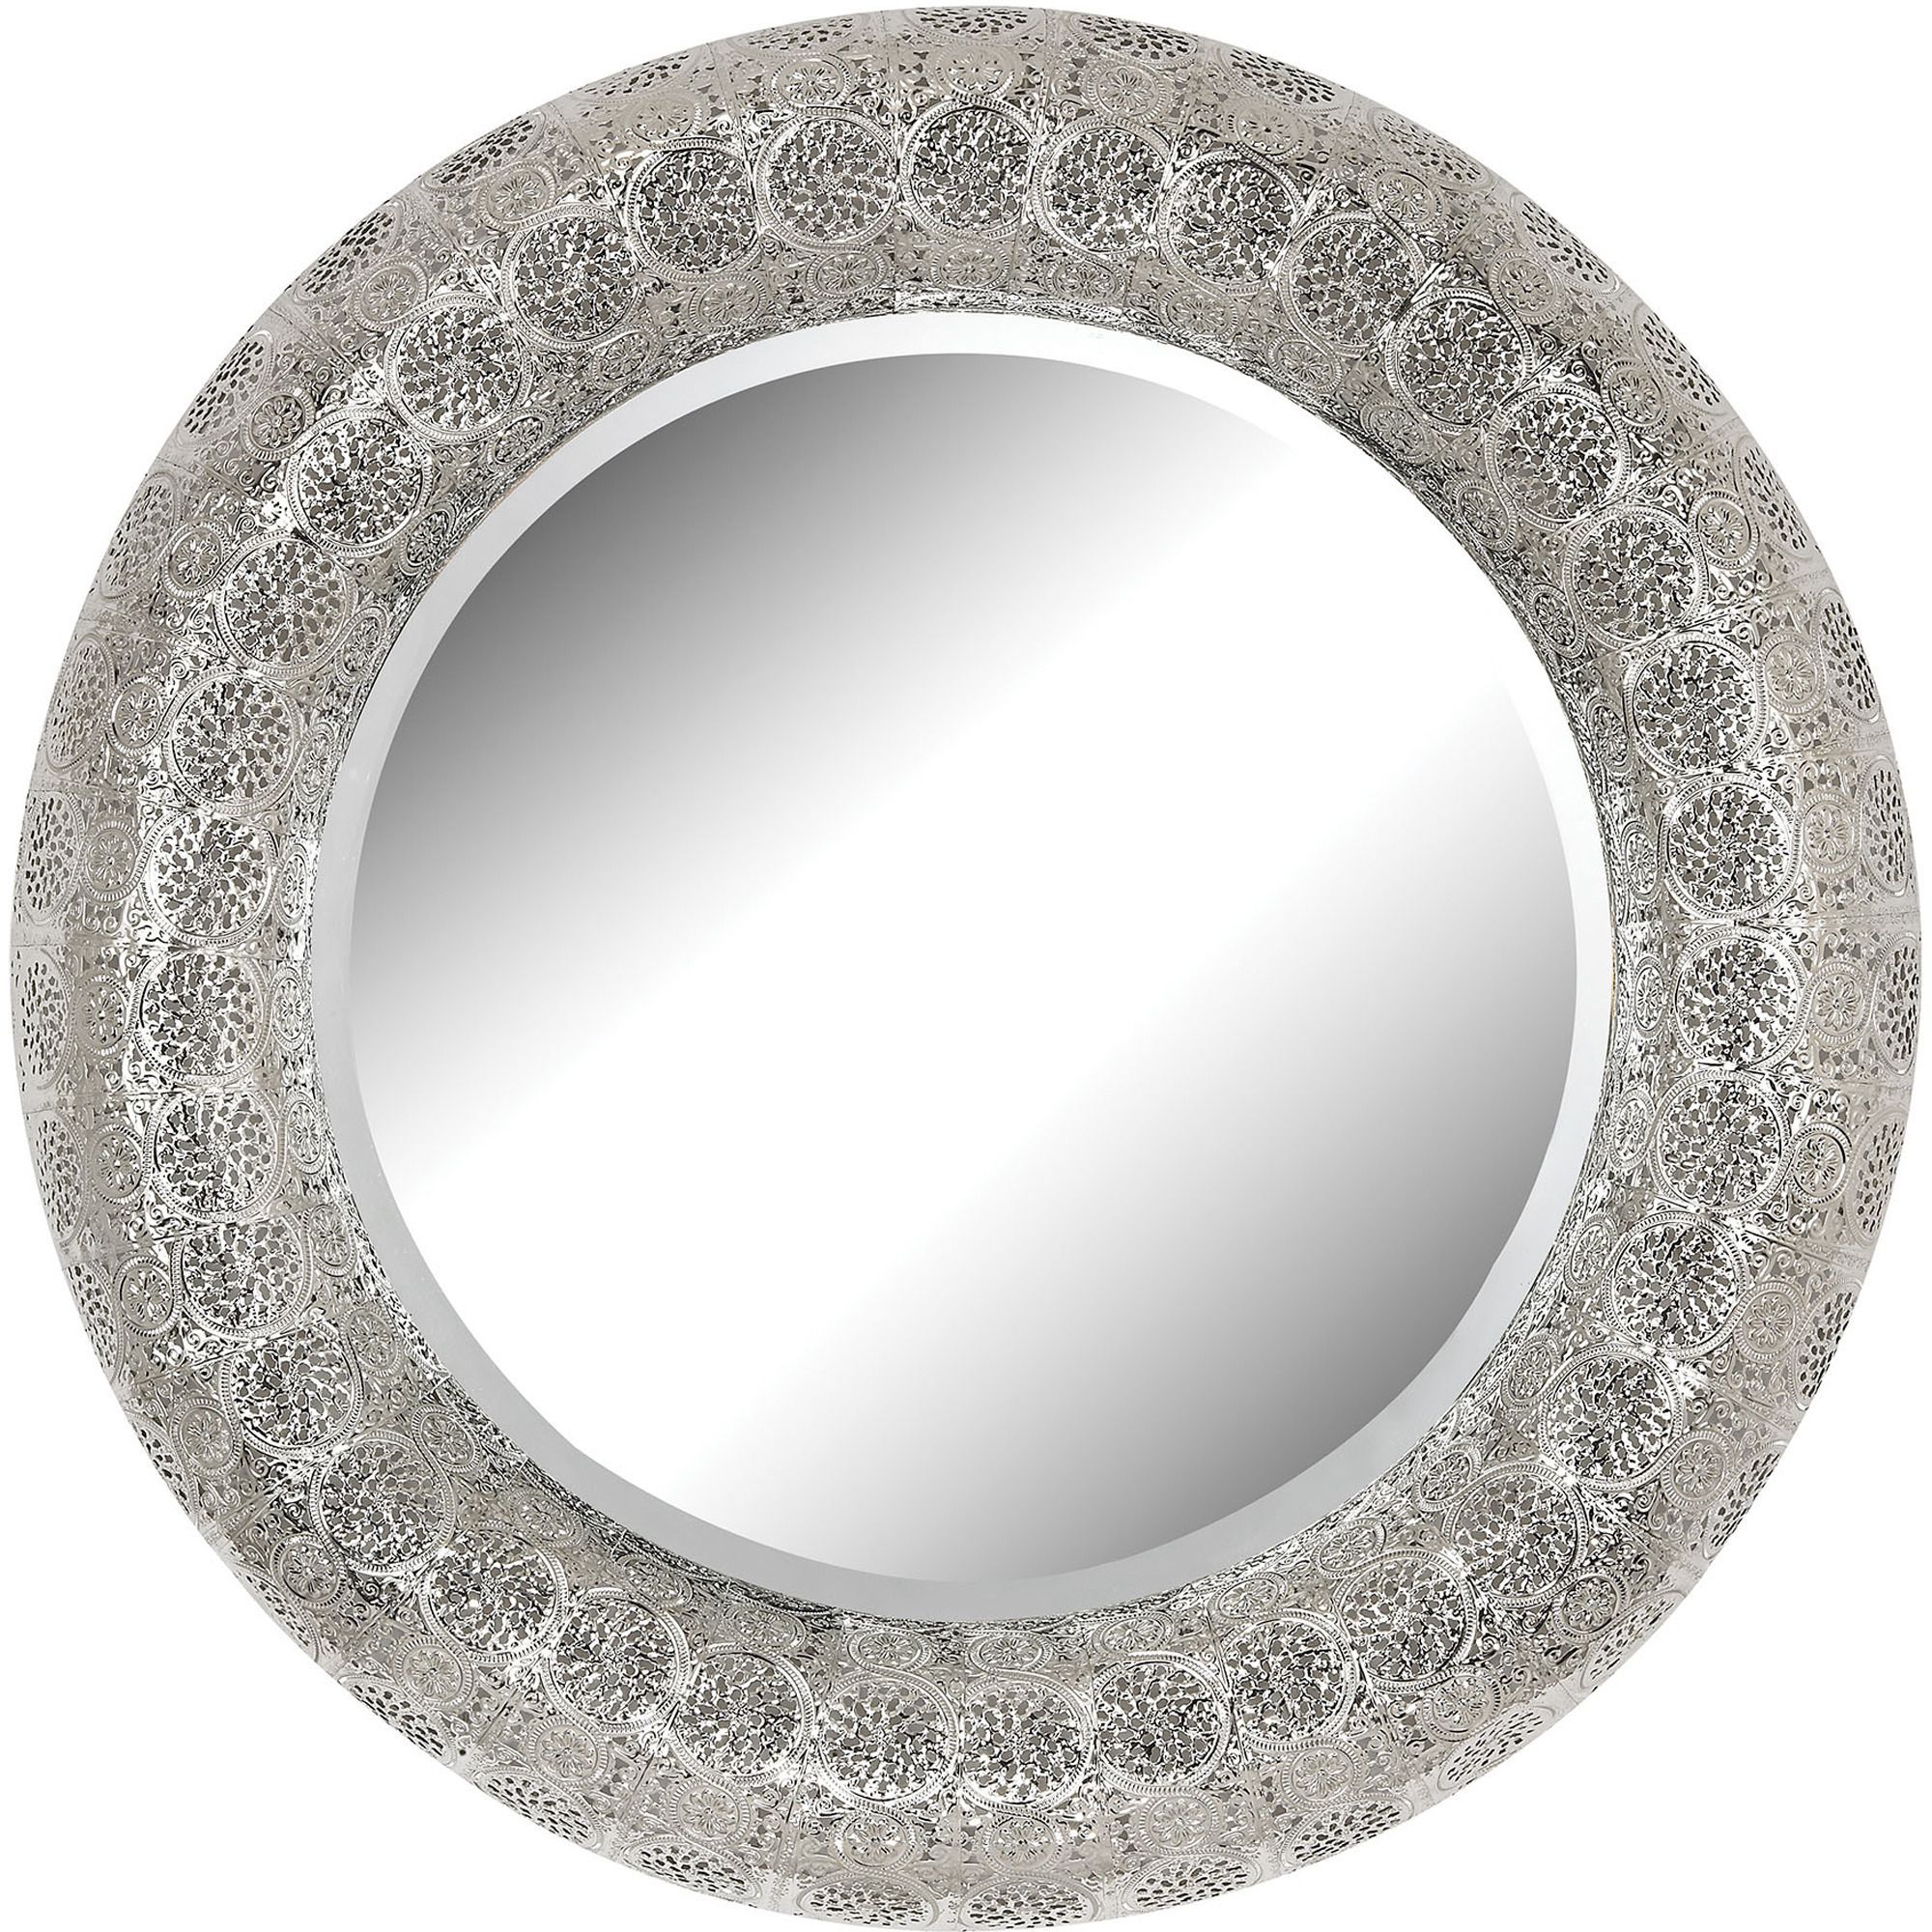 Embossed Metal Frame Mirror In Silver | Sterling | Home Gallery Stores Within Metallic Silver Framed Wall Mirrors (View 9 of 15)